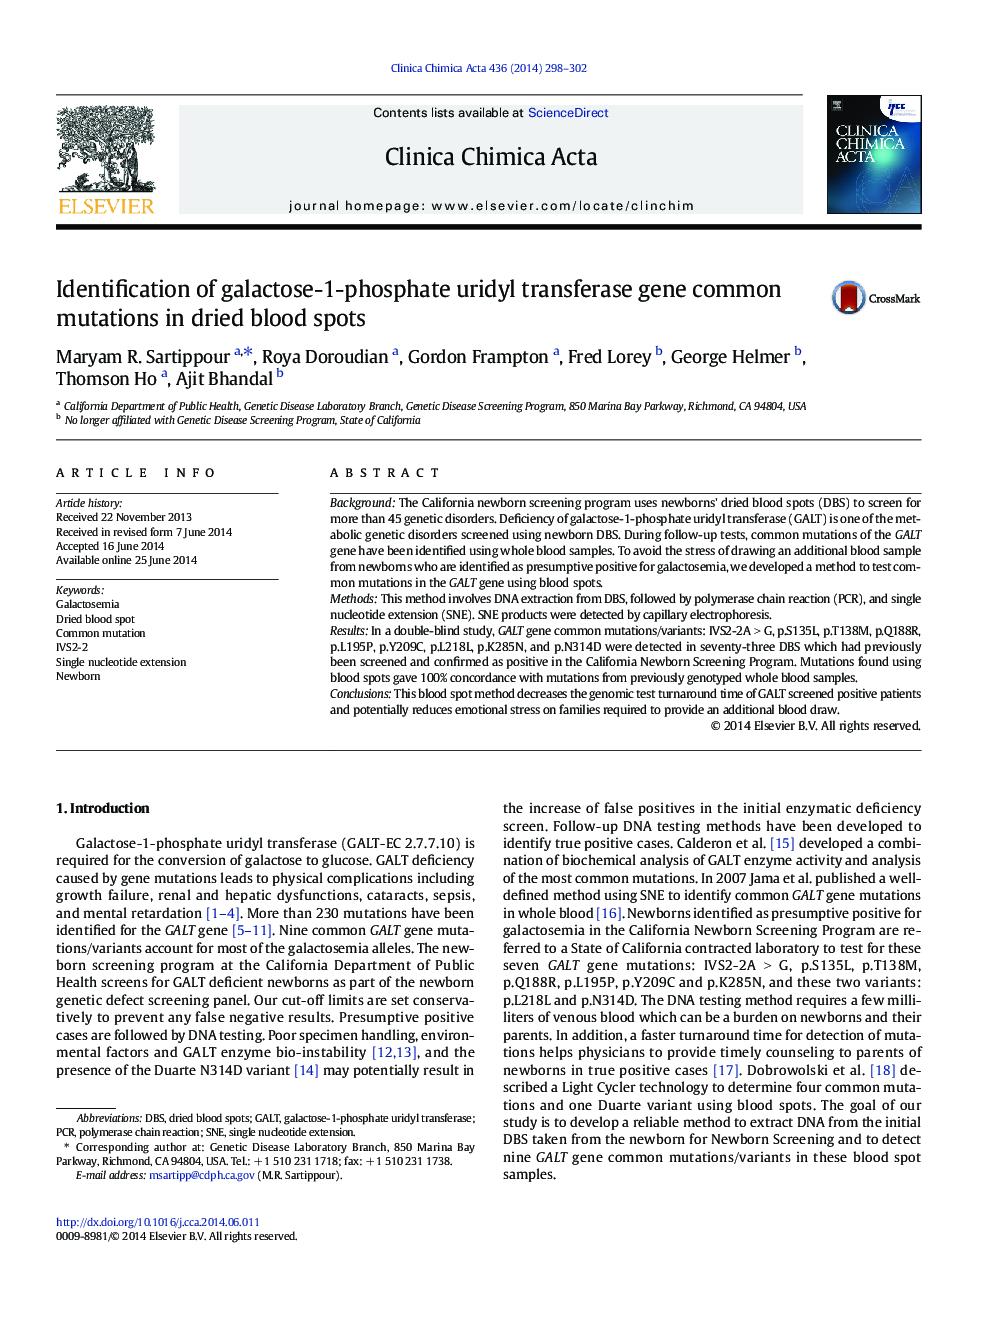 Identification of galactose-1-phosphate uridyl transferase gene common mutations in dried blood spots